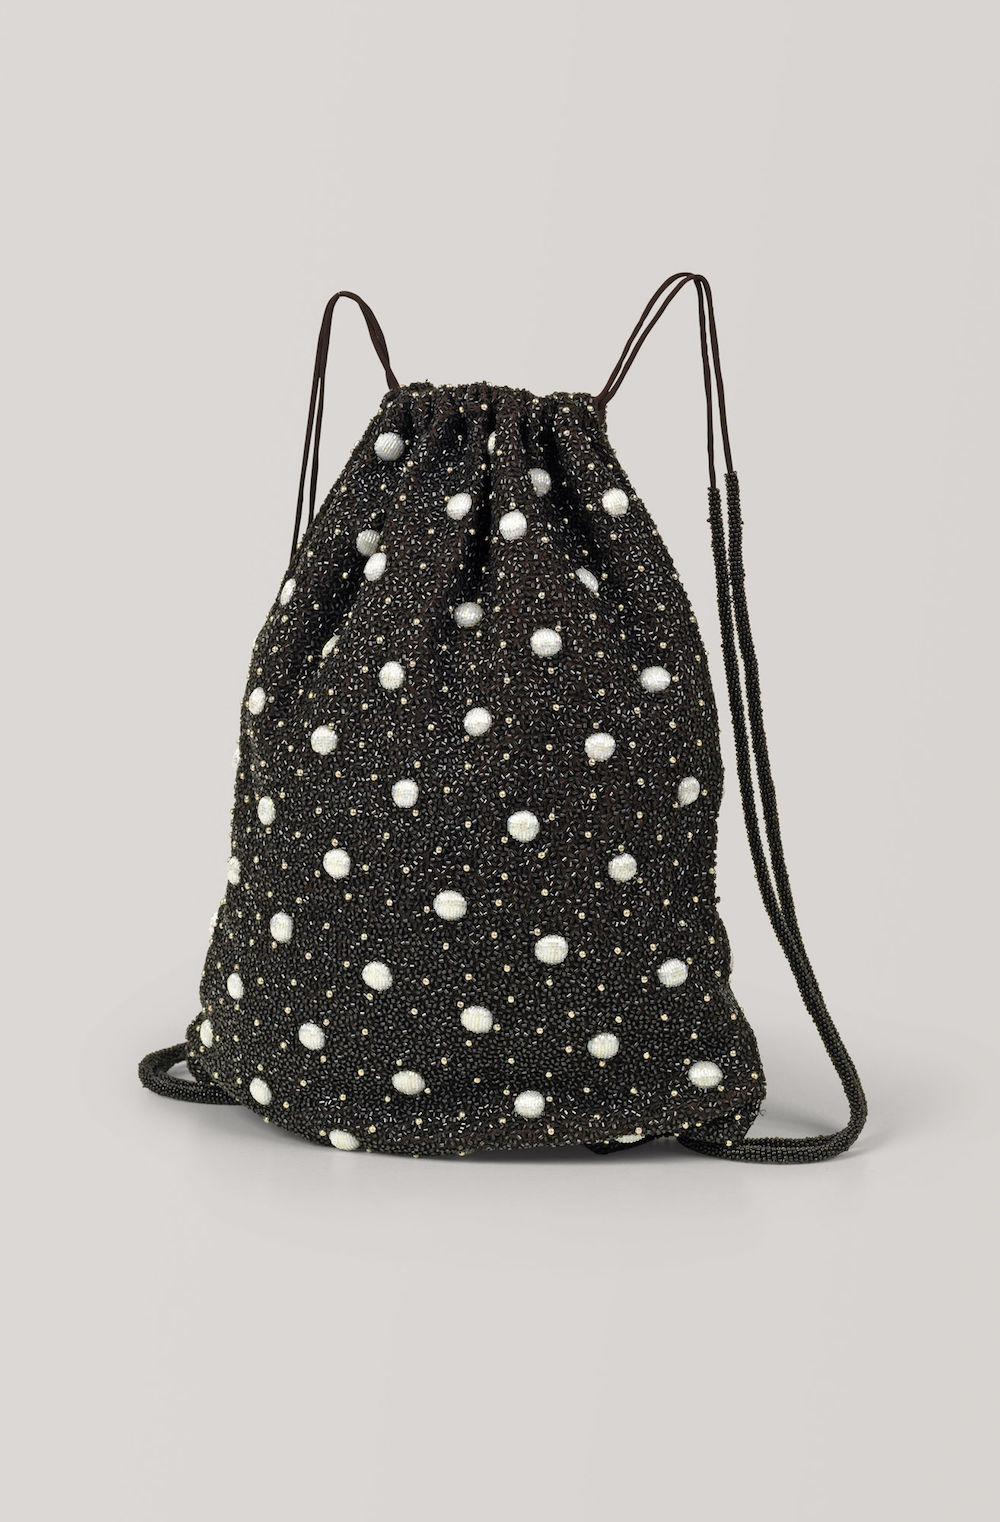 17 Chic Backpacks for Grown-Ups - theFashionSpot